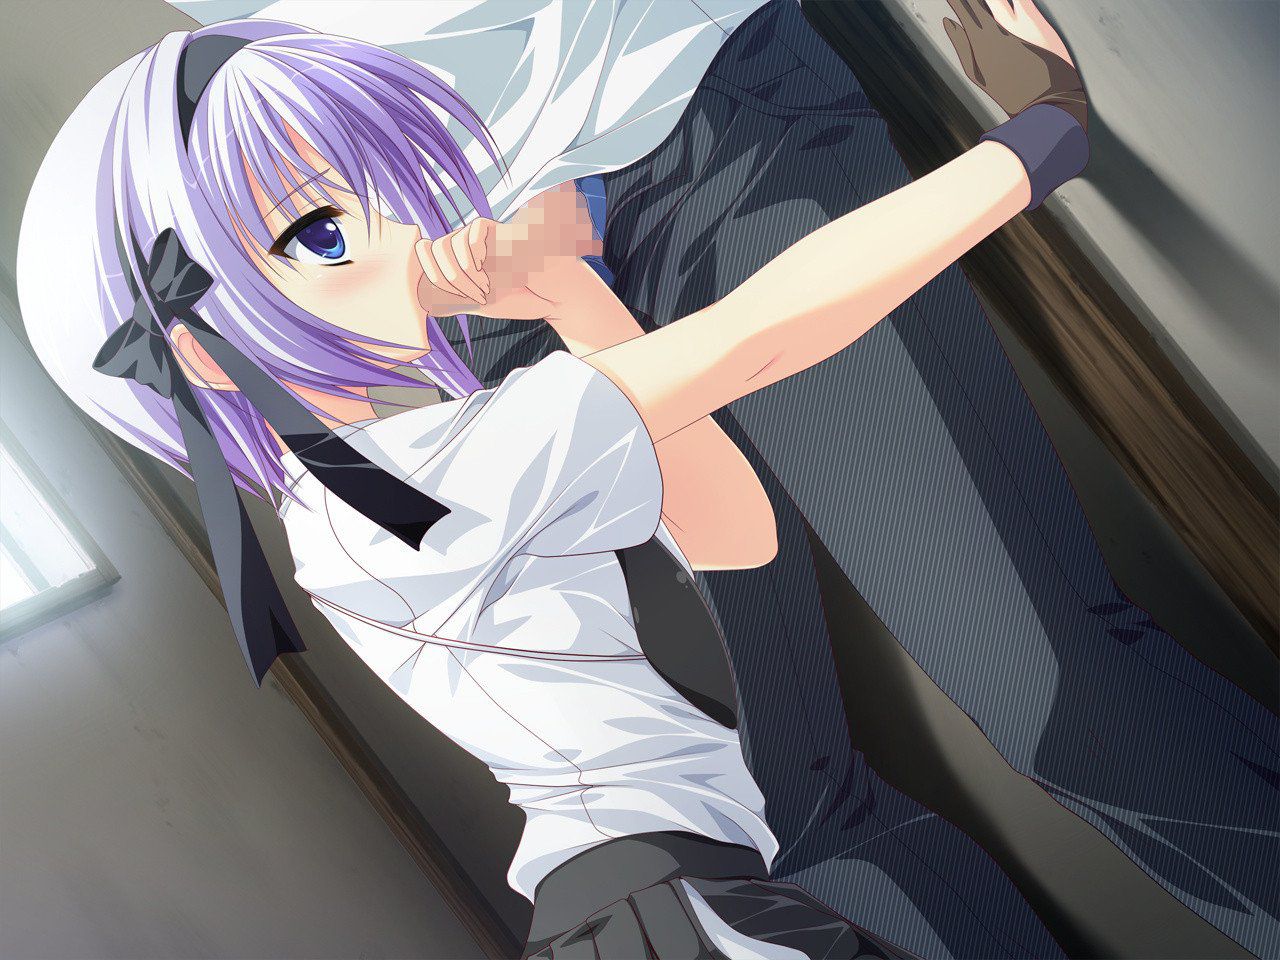 A cute girl serves with her mouth! Two-dimensional erotic image that is too healthy to 14